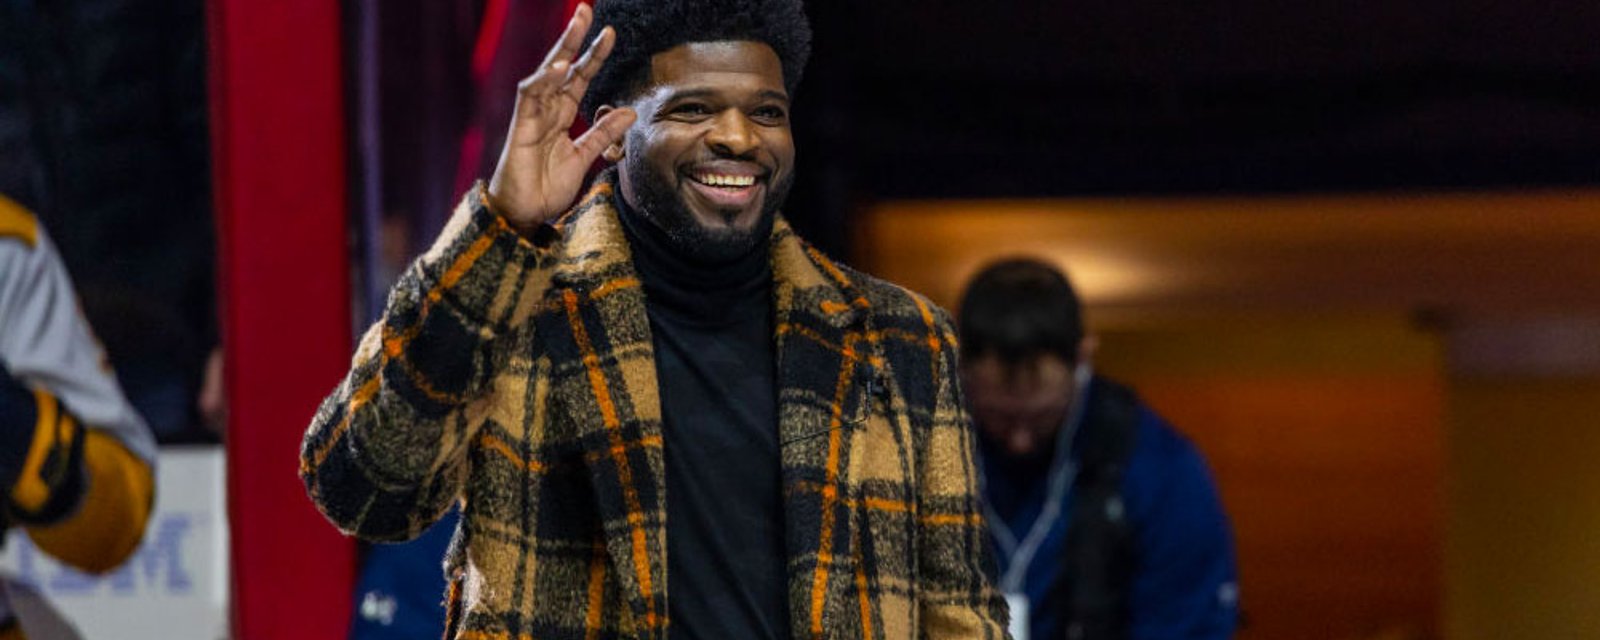 PK Subban divides the hockey world with recent statements